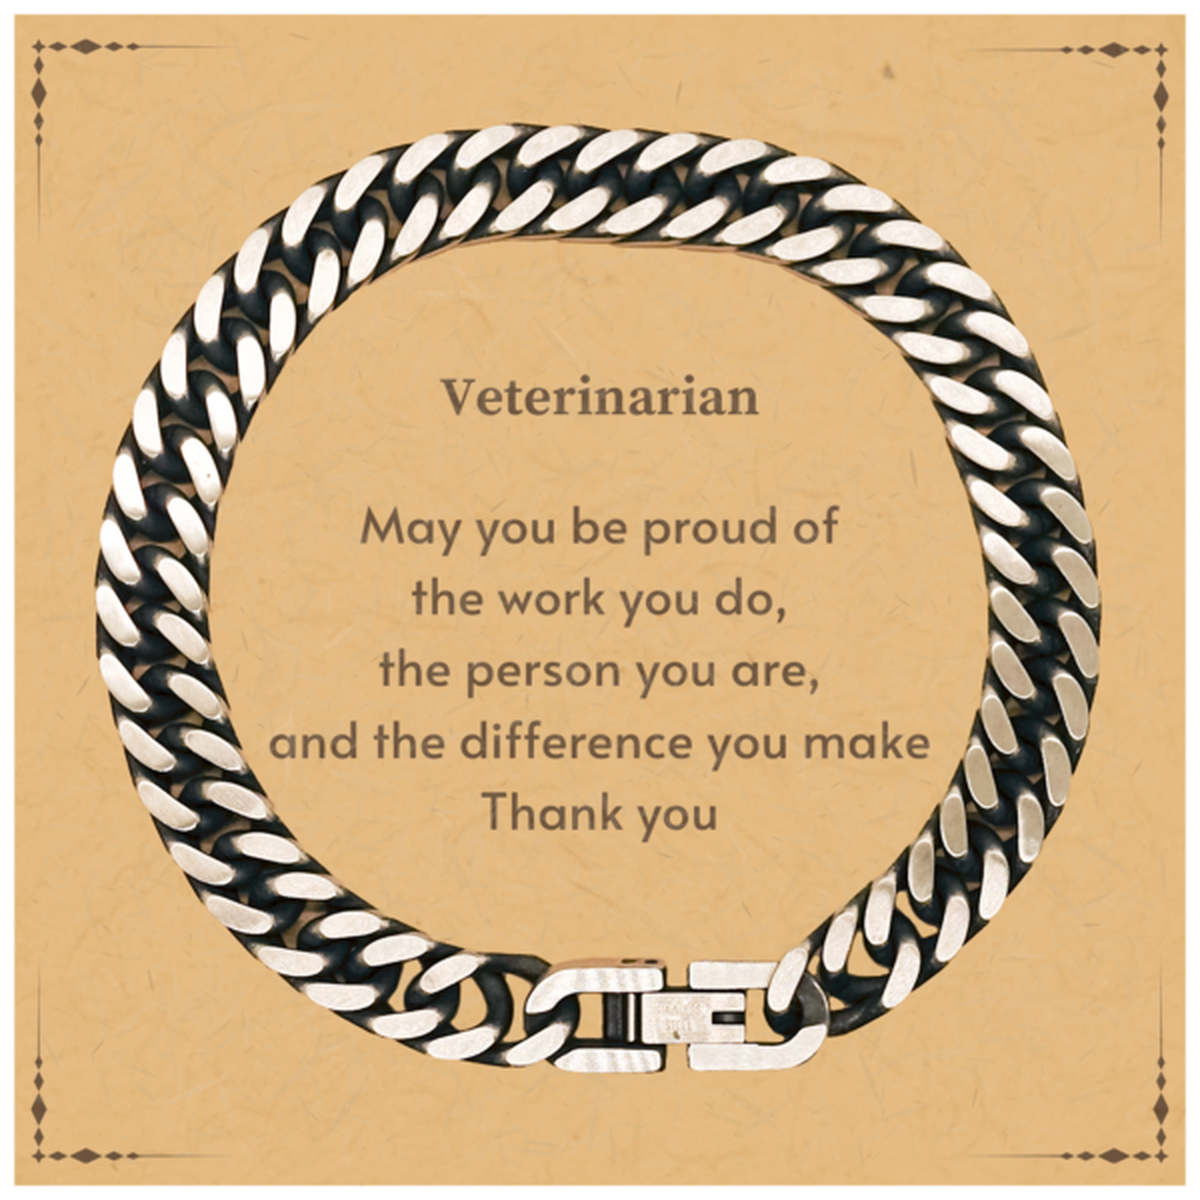 Heartwarming Cuban Link Chain Bracelet Retirement Coworkers Gifts for Veterinarian, Veterinarian May You be proud of the work you do, the person you are Gifts for Boss Men Women Friends